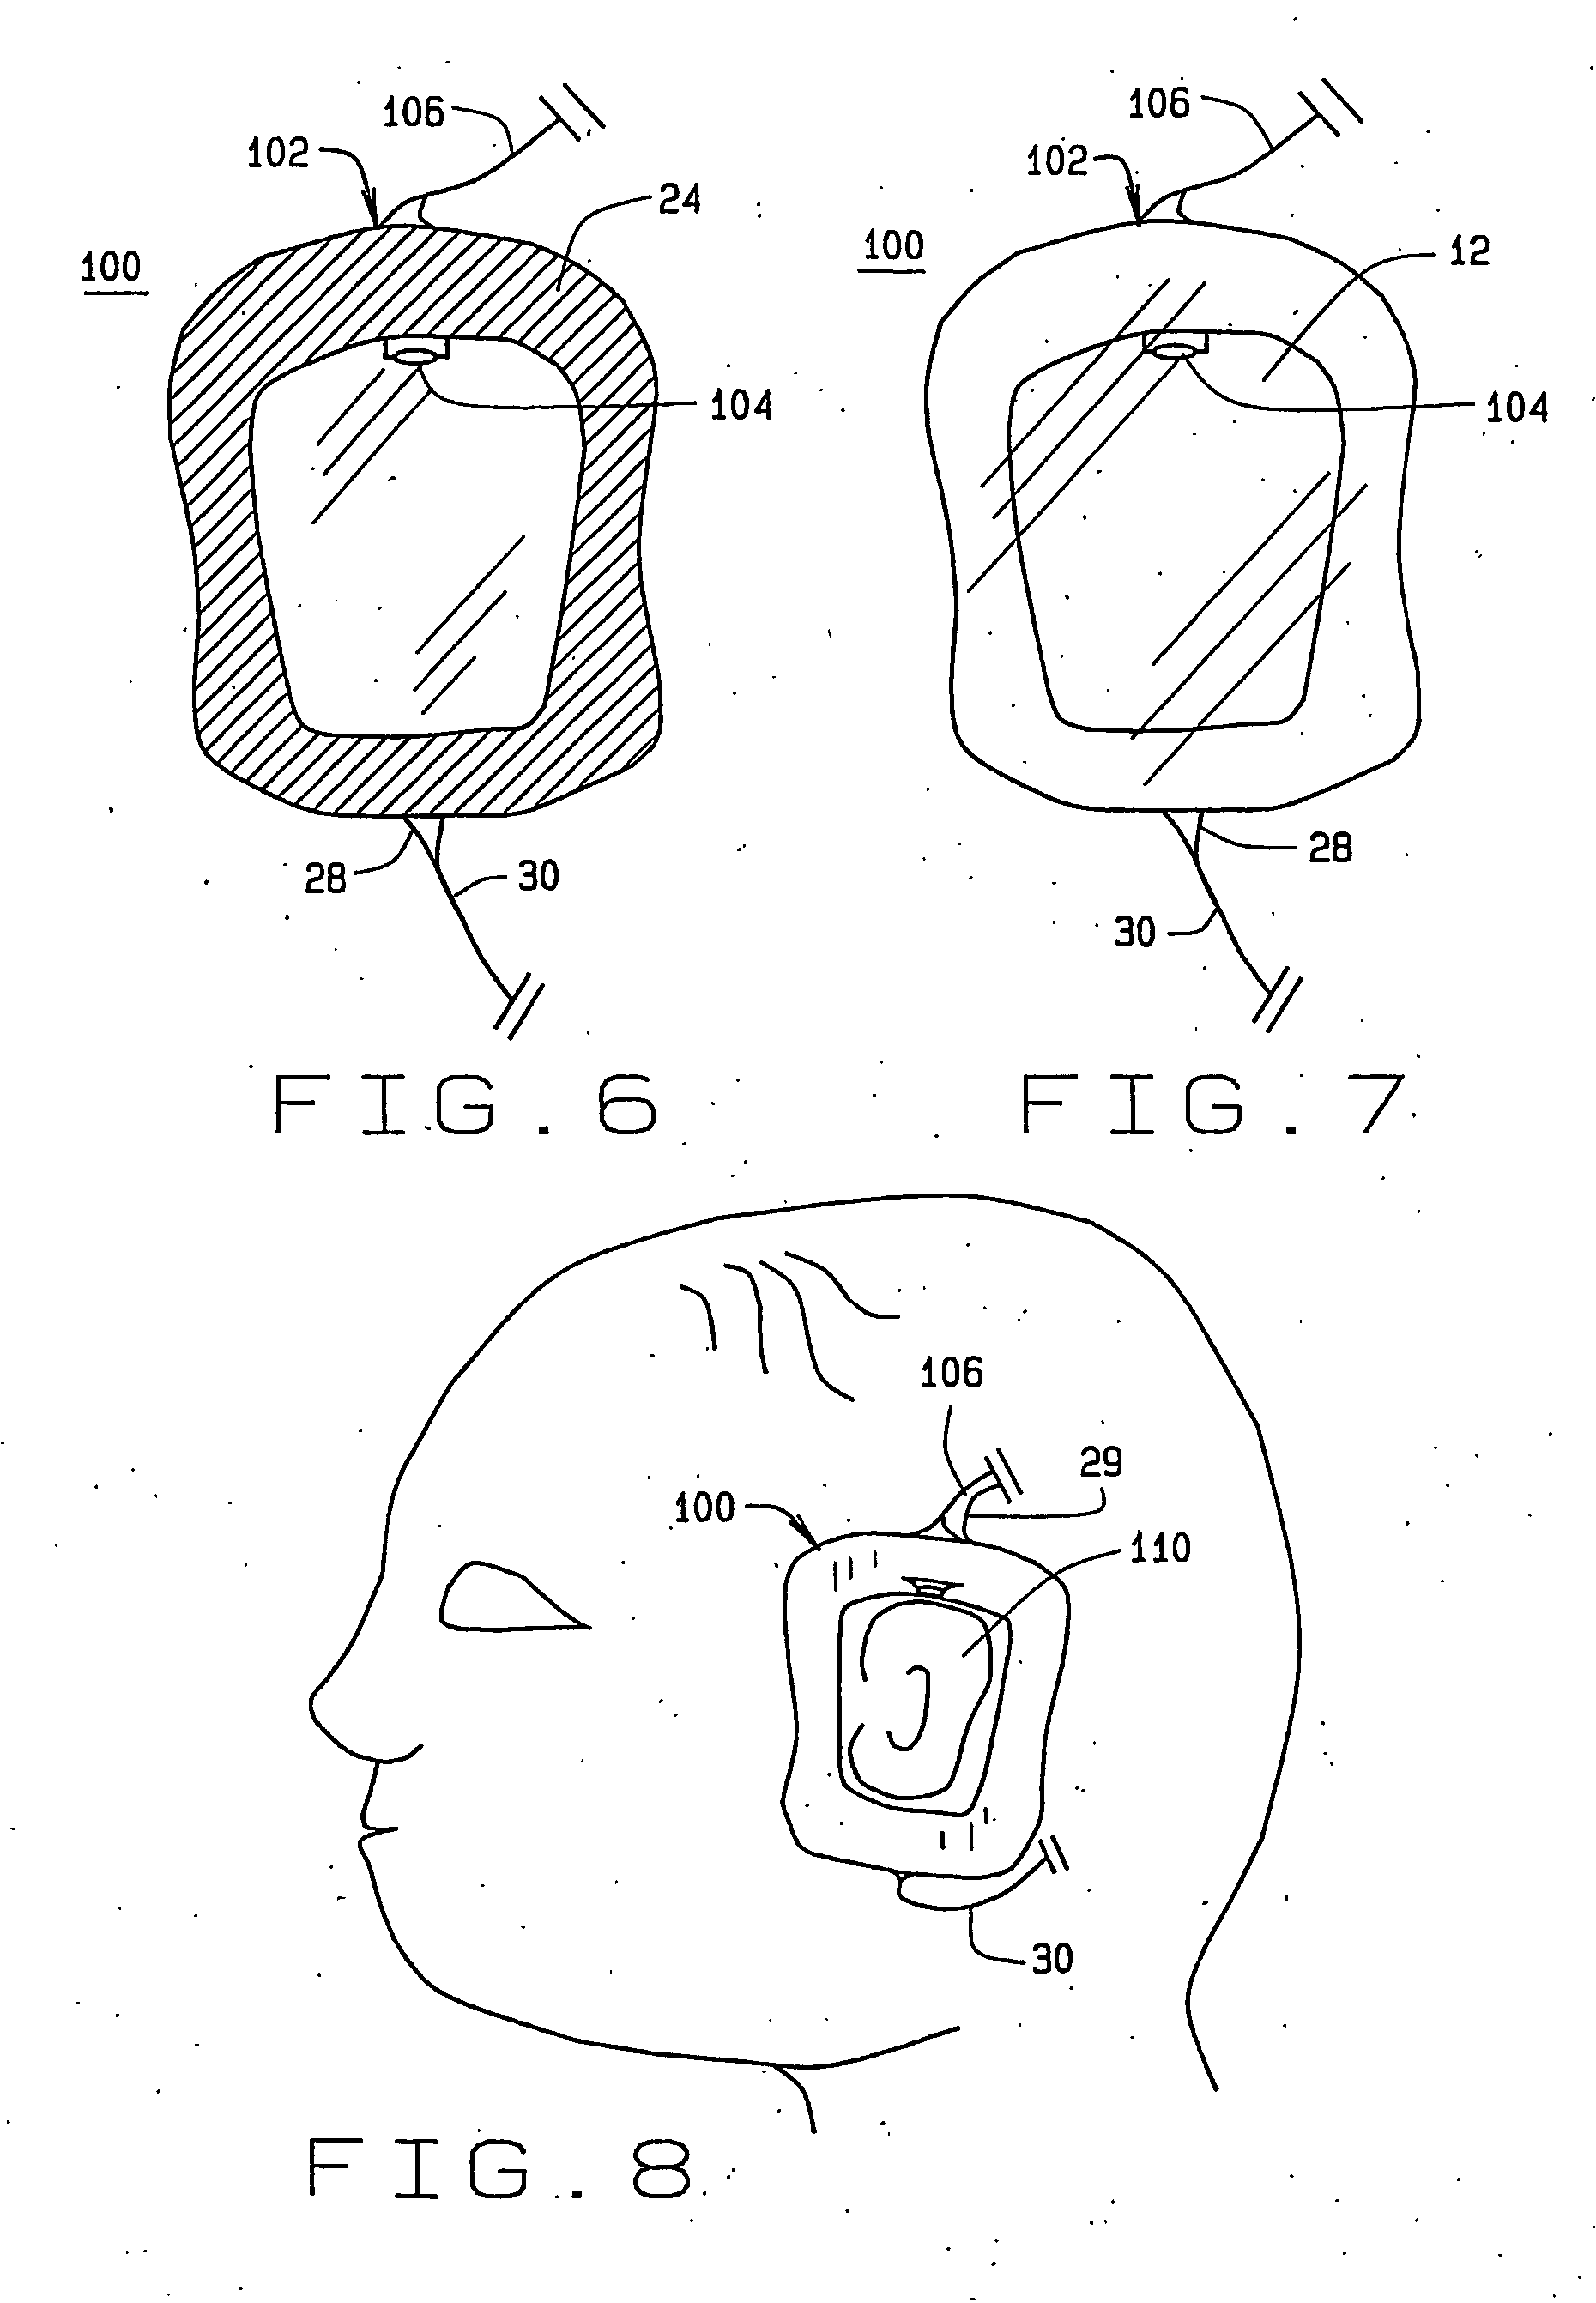 Apparatus for evoking and recording bio potentials